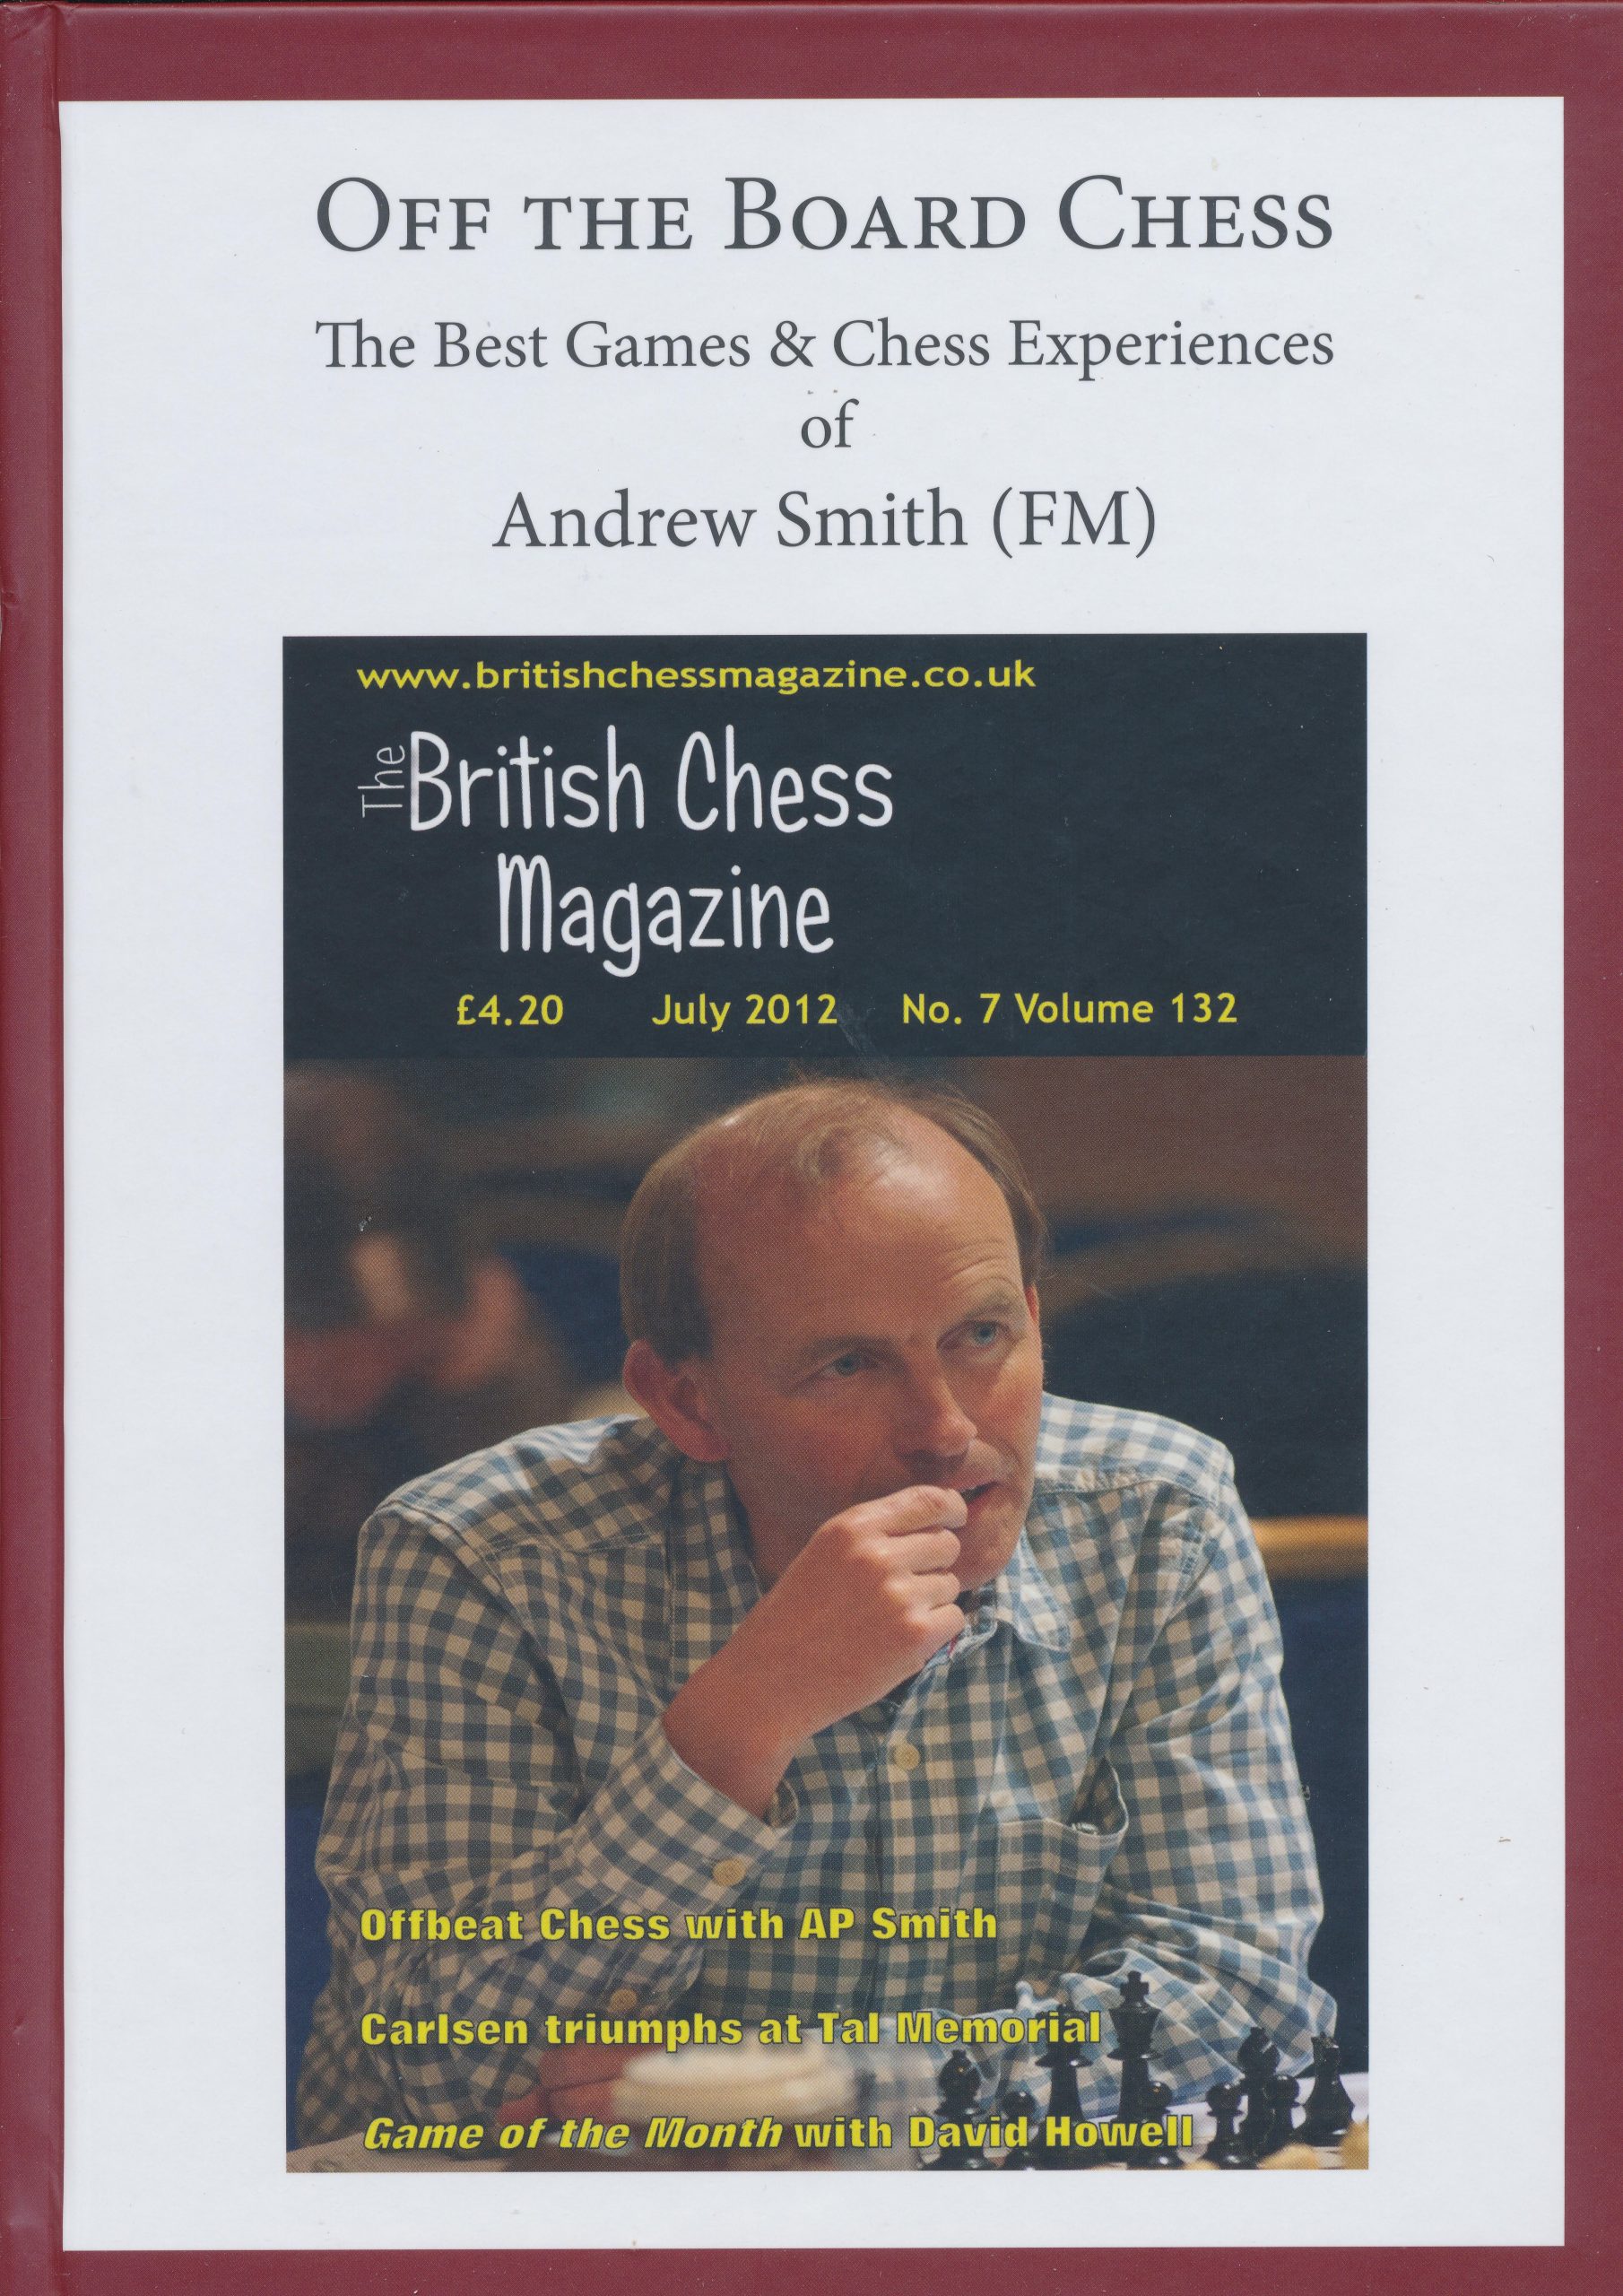 Off the Board Chess, The Best Games and Chess Experiences of Andrew Smith (FM), FM Andrew Smith, Self published, 2021, ISBN 978-1-5272-8572-9